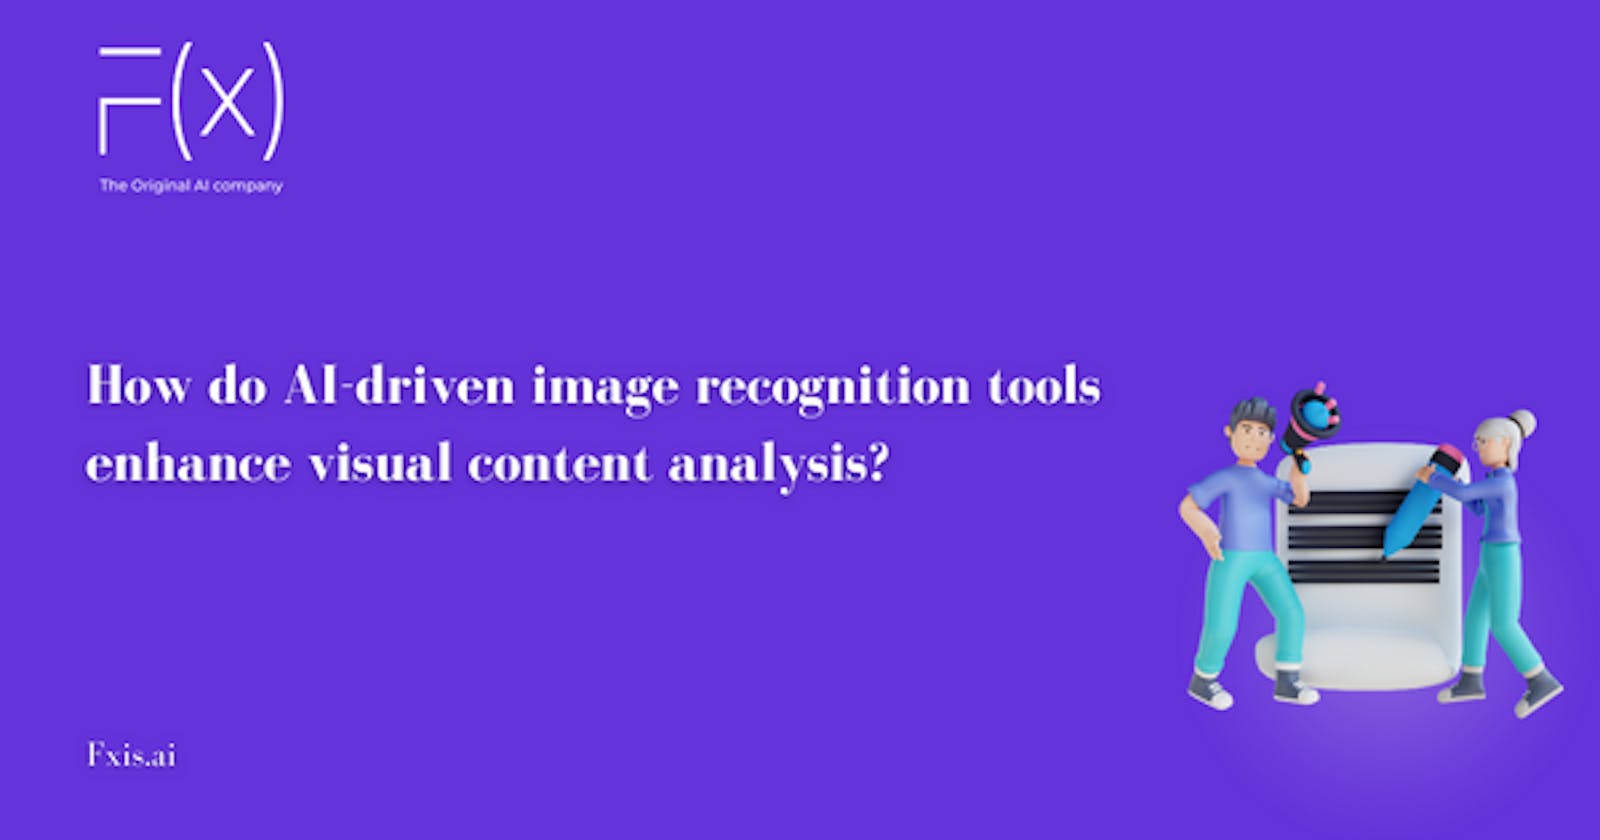 How do AI-driven image recognition tools enhance visual content analysis?